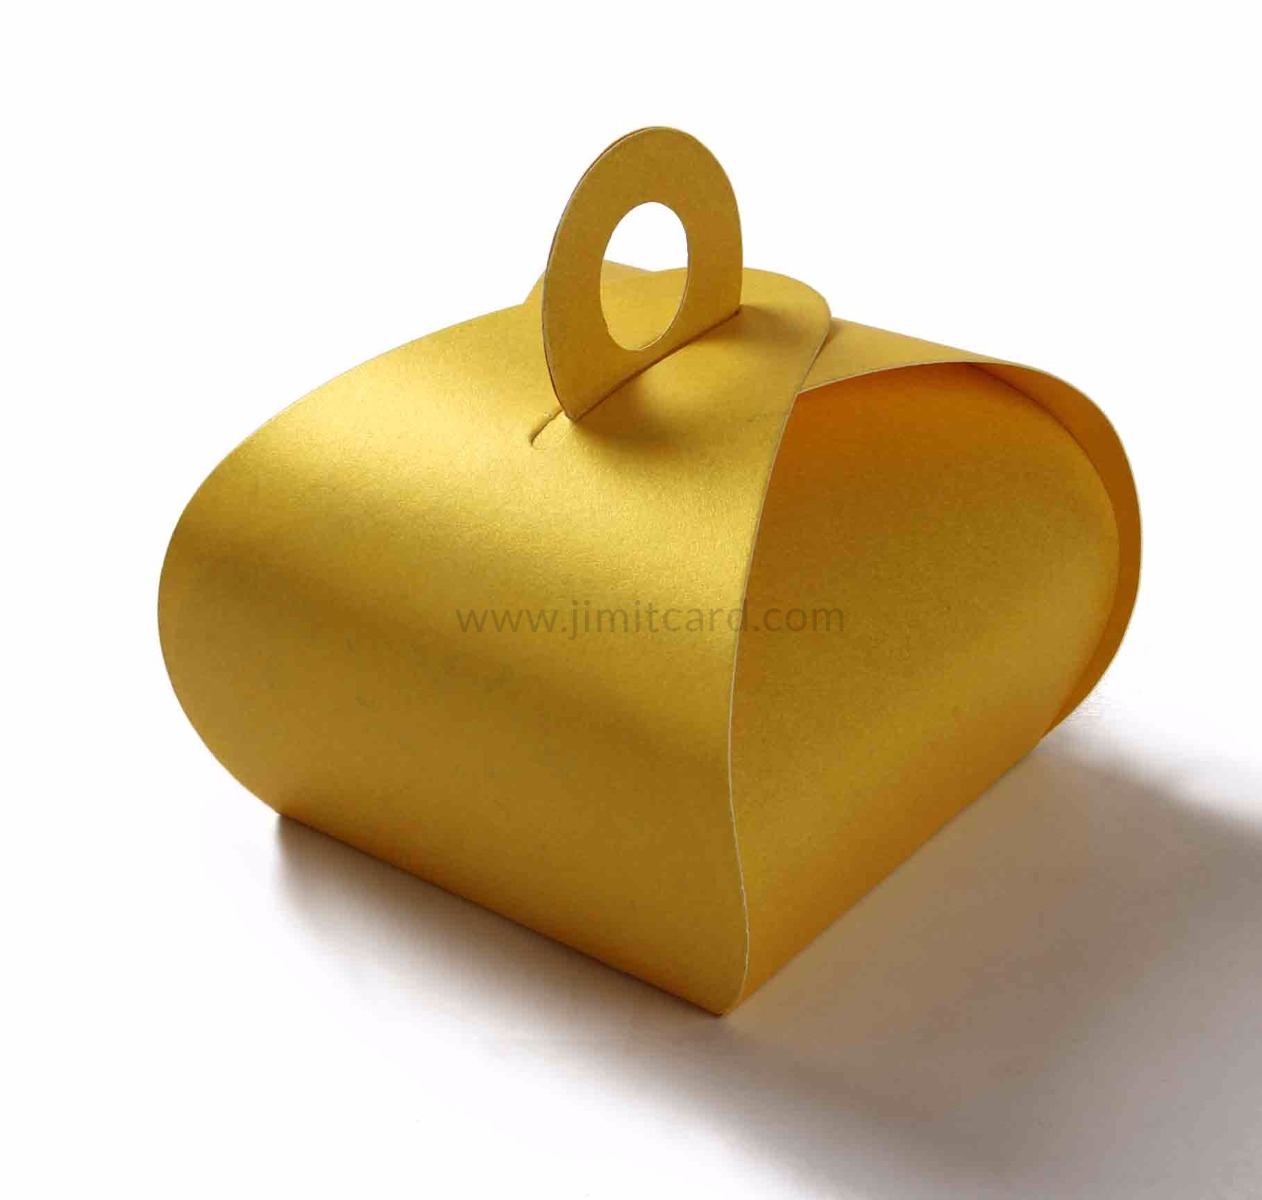 Roll top party Favor Box in Yellow Color with a holder